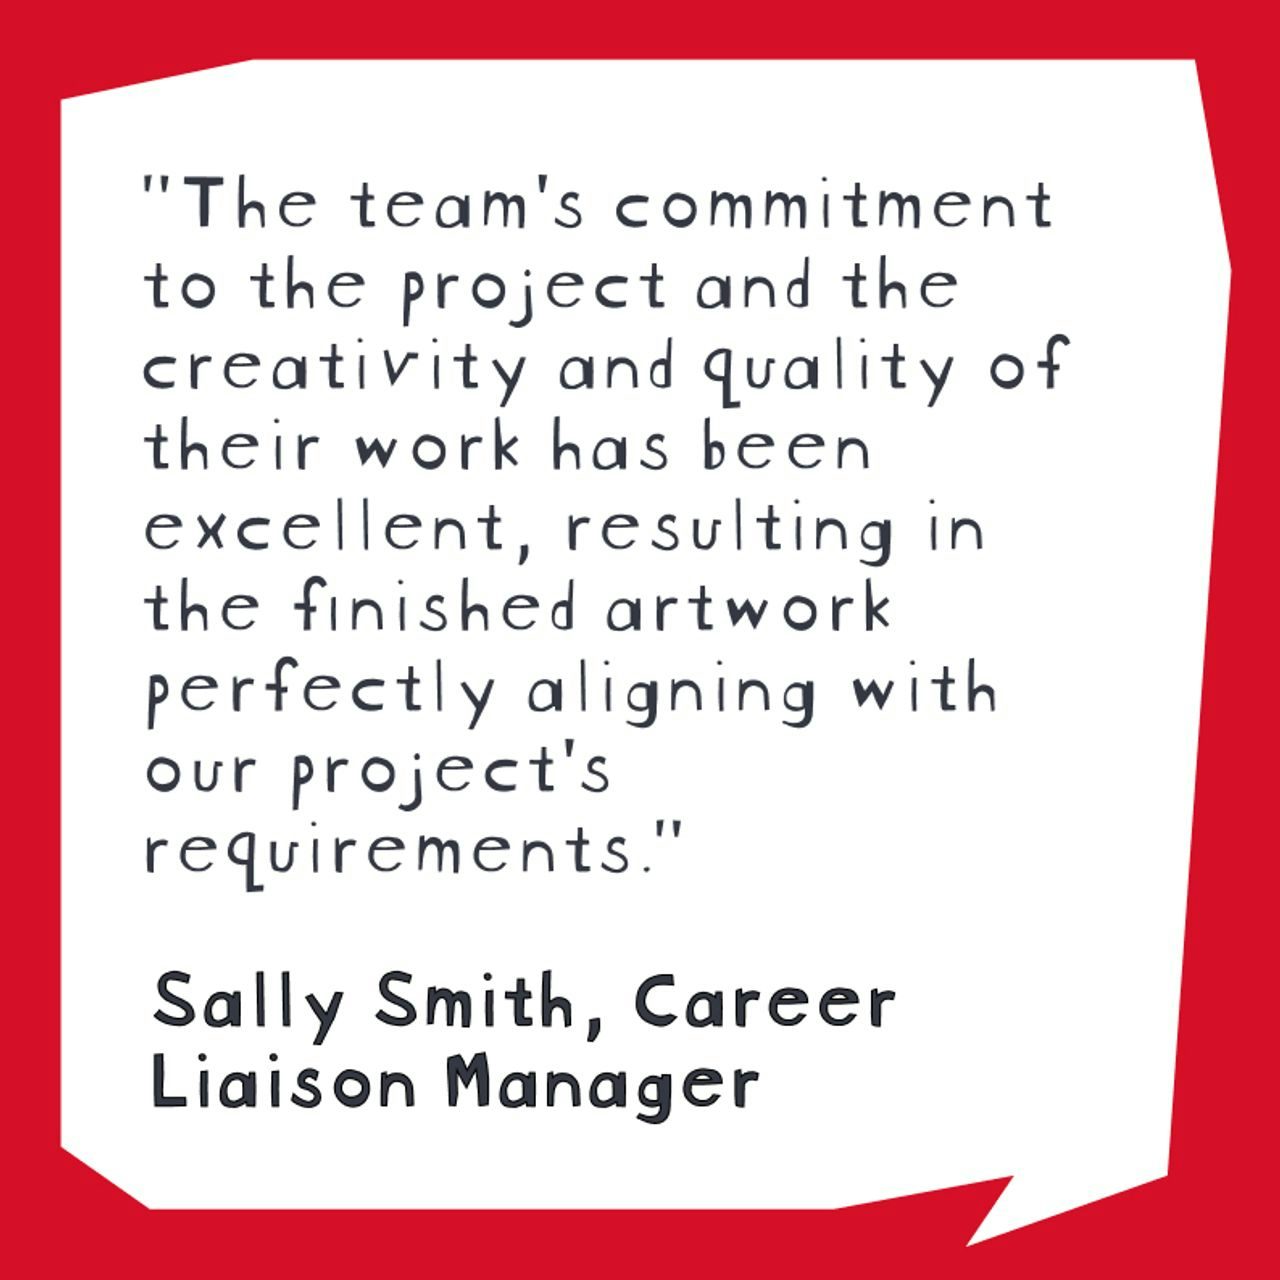 Customer testimonial by Sally Smith, Career Liaison Manager, commending a team's commitment, creativity, and quality of work in aligning with project requirements, displayed within a speech bubble on a red background.